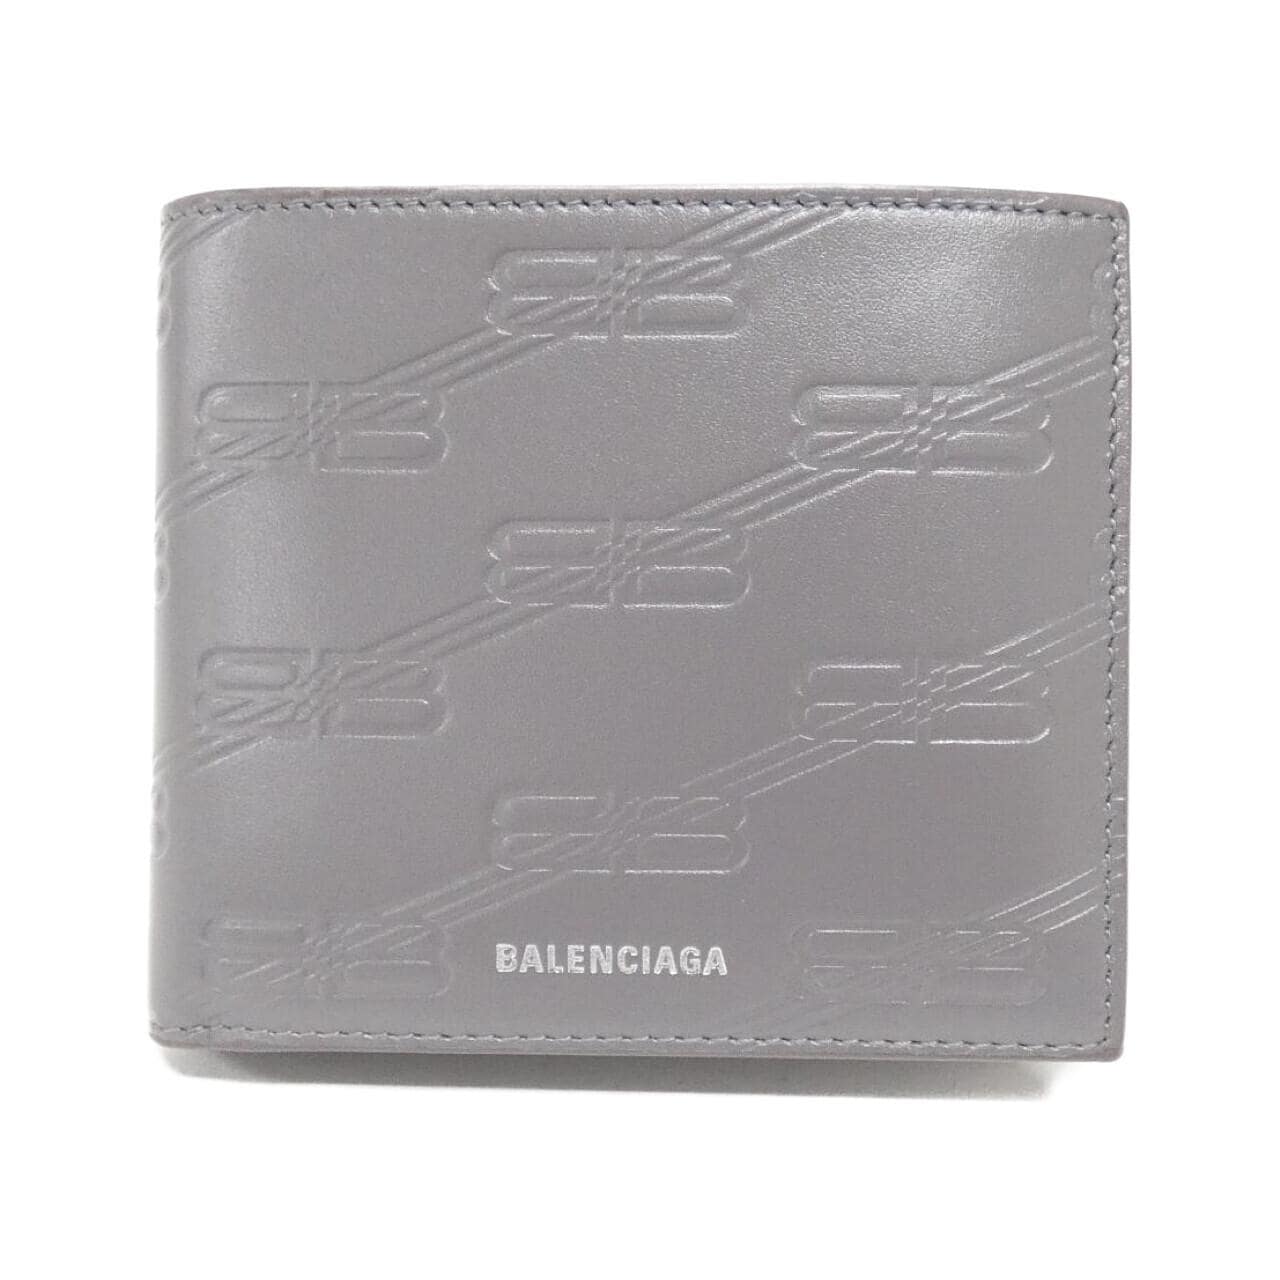 [BRAND NEW] BALENCIAGA Embossed Square Fold Coin Wallet 718395 210JS Wallet